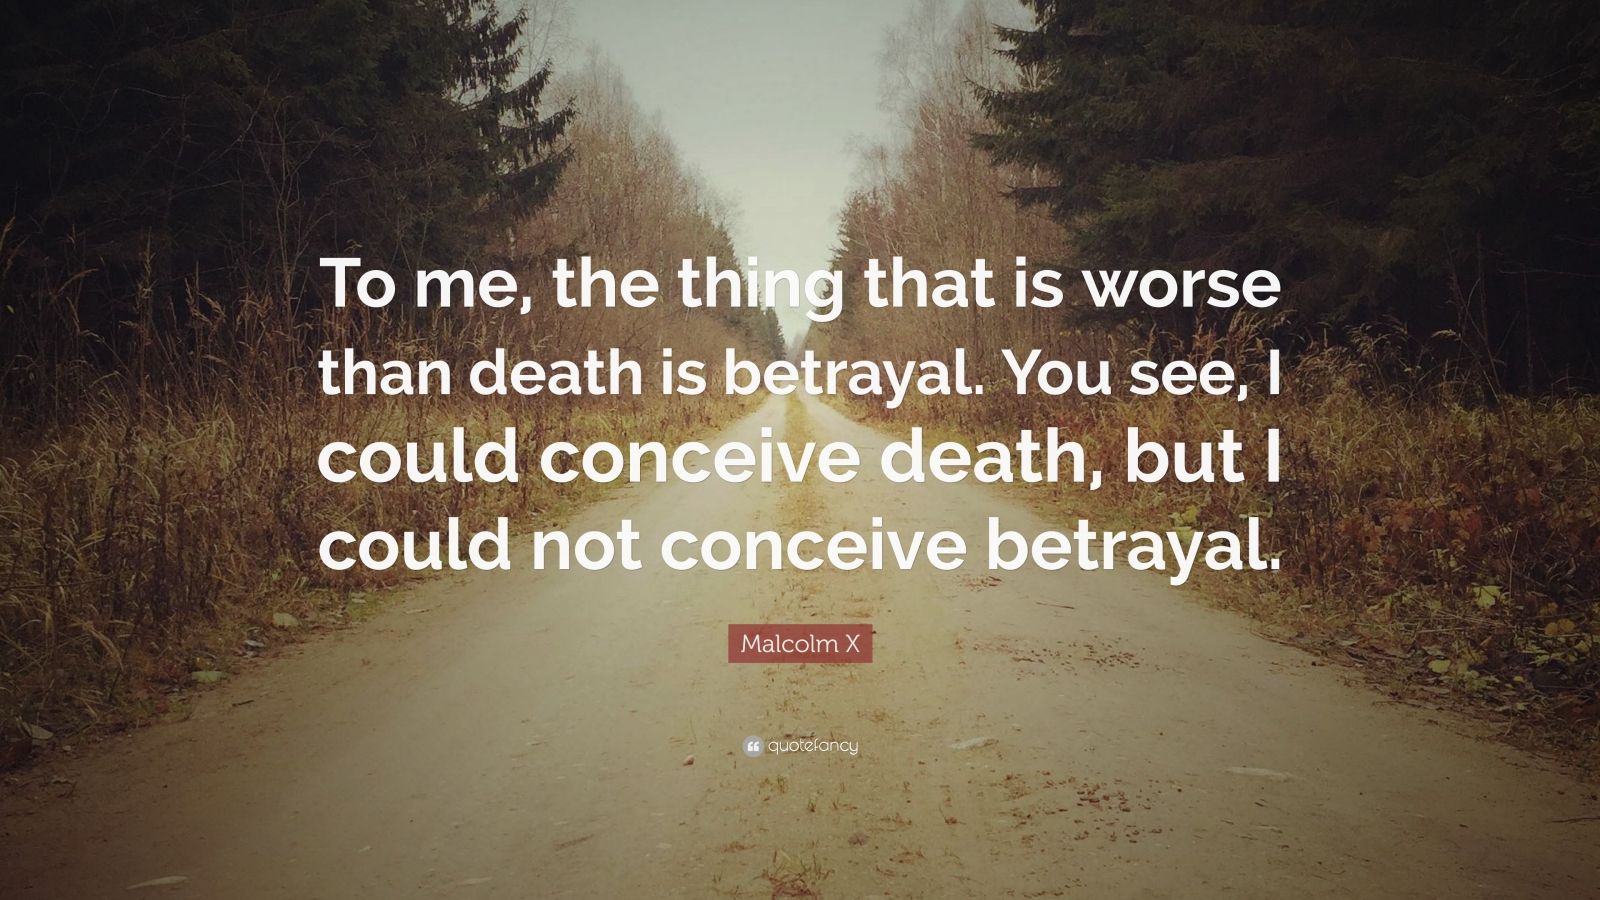 Malcolm X Quote: “To me, the thing that is worse than death is betrayal ...